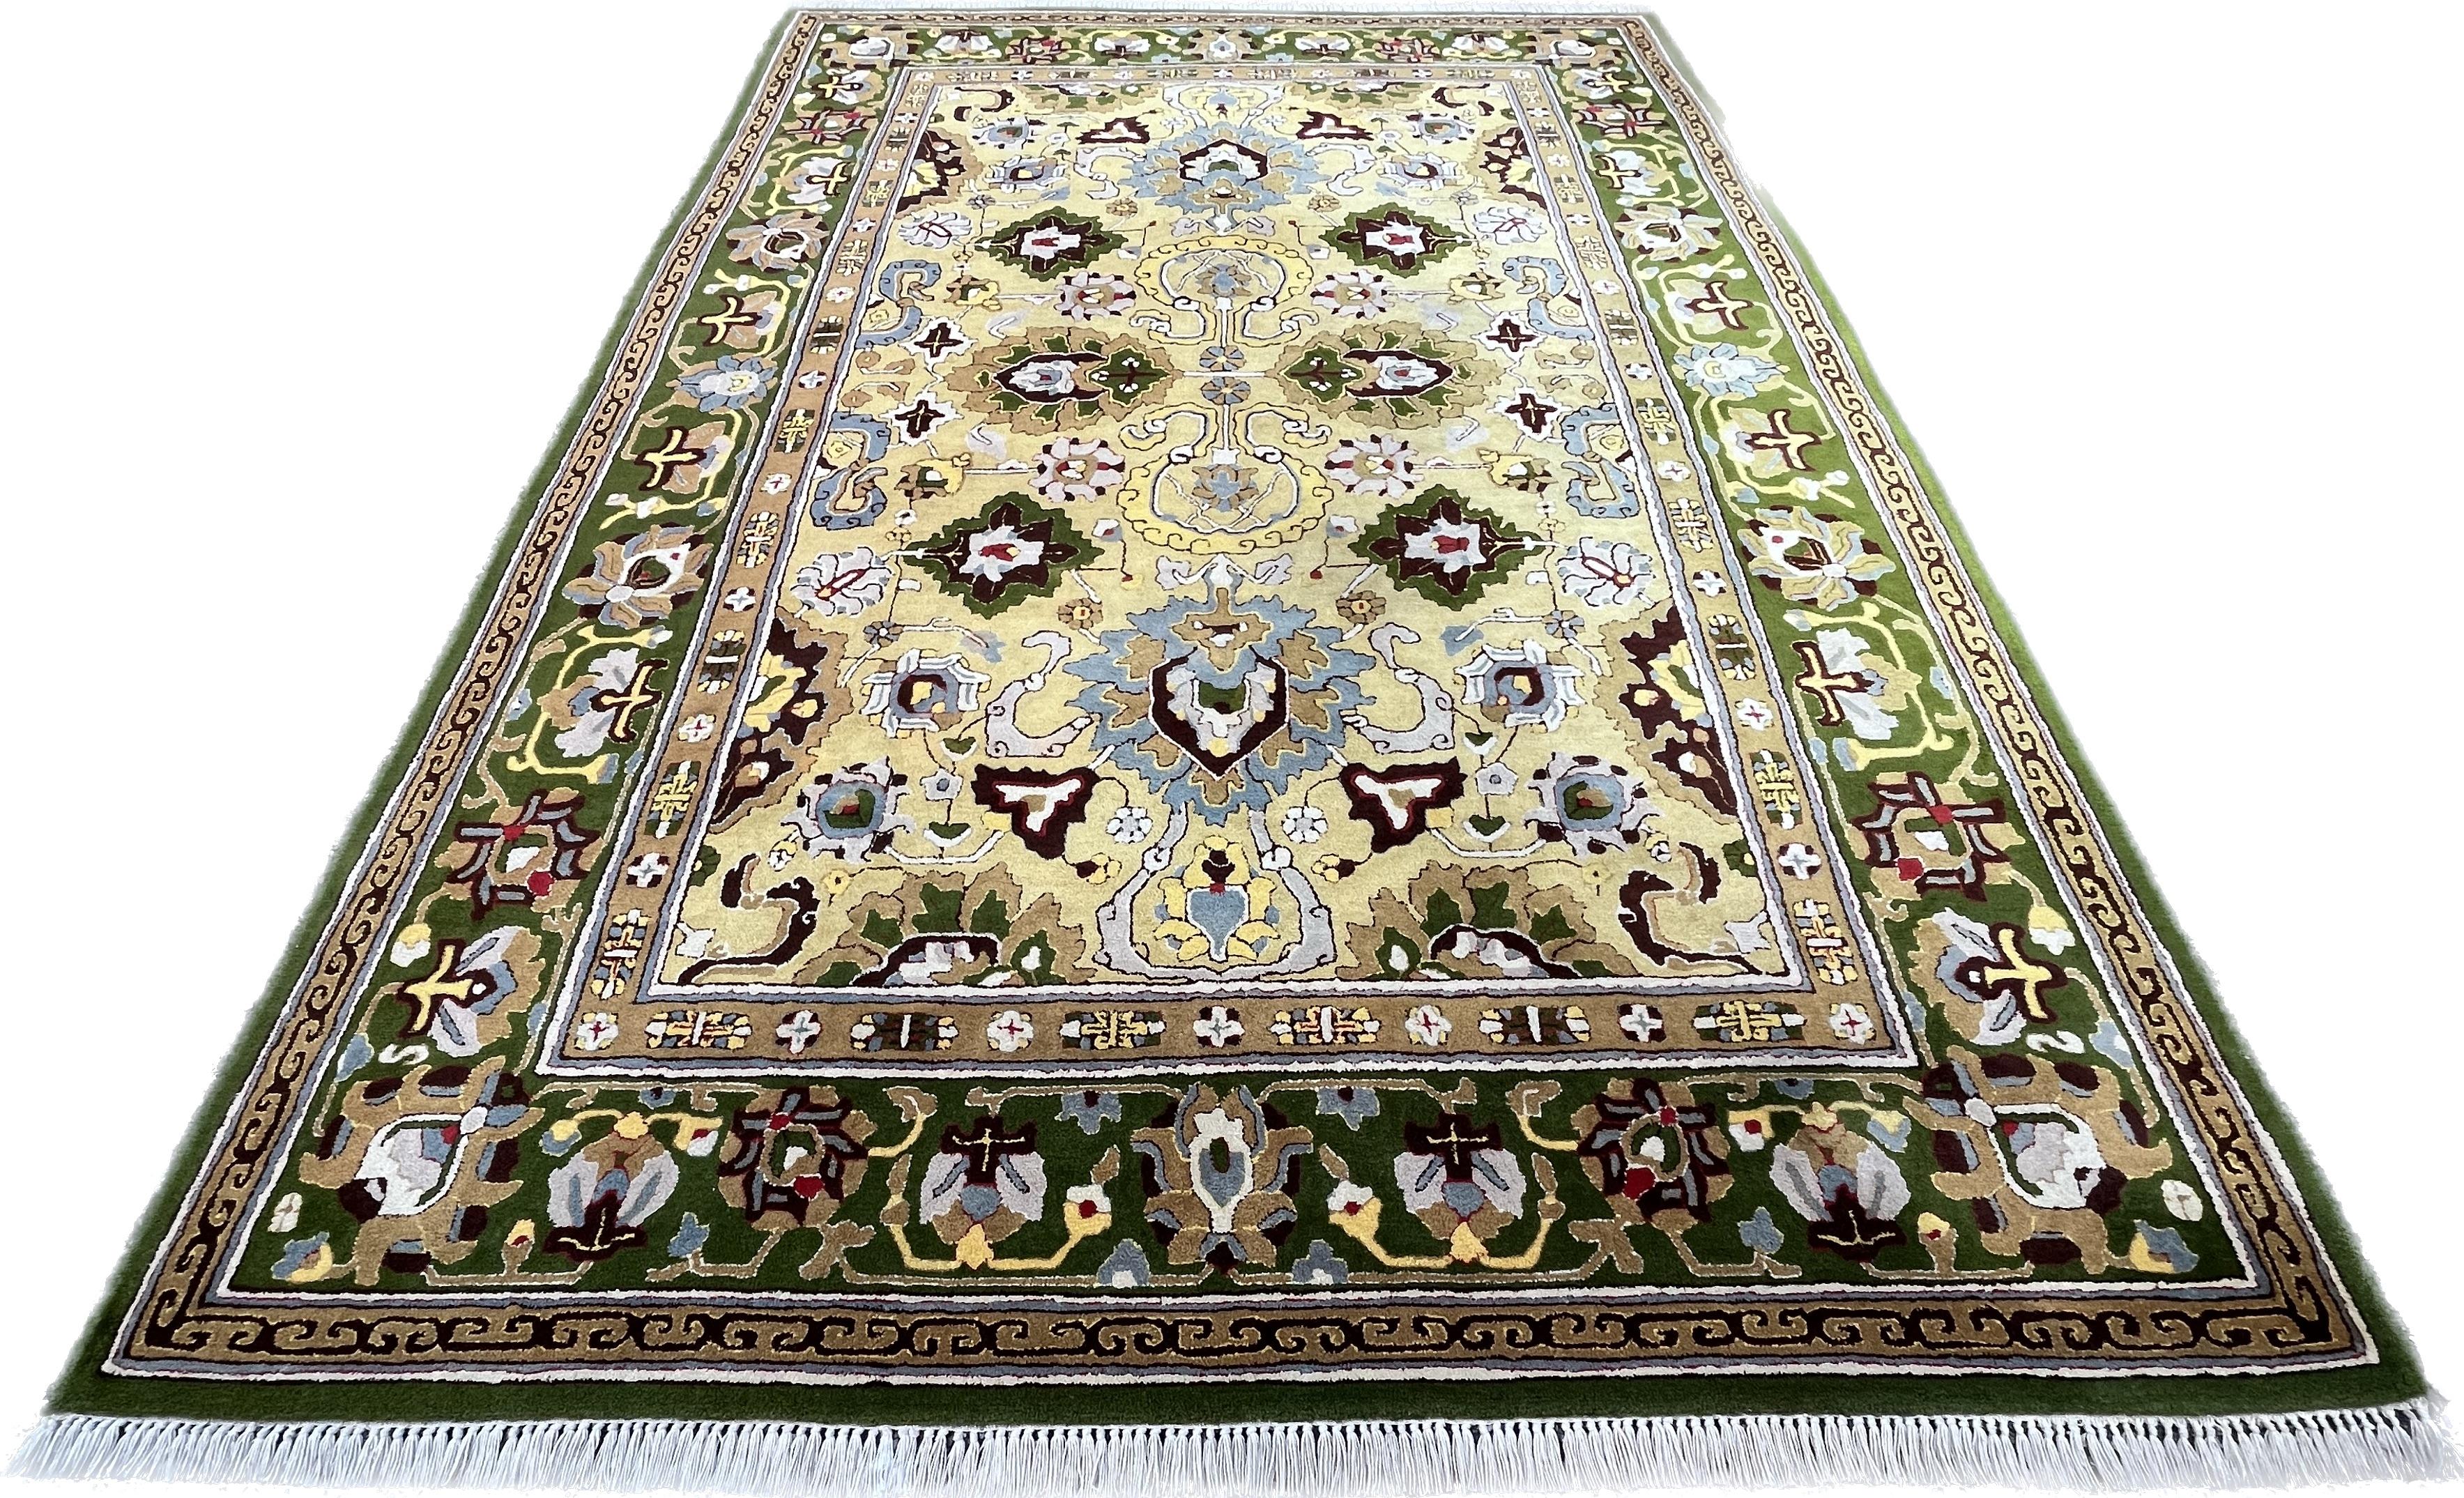 Other European Design Carpet From The Safavid Empire